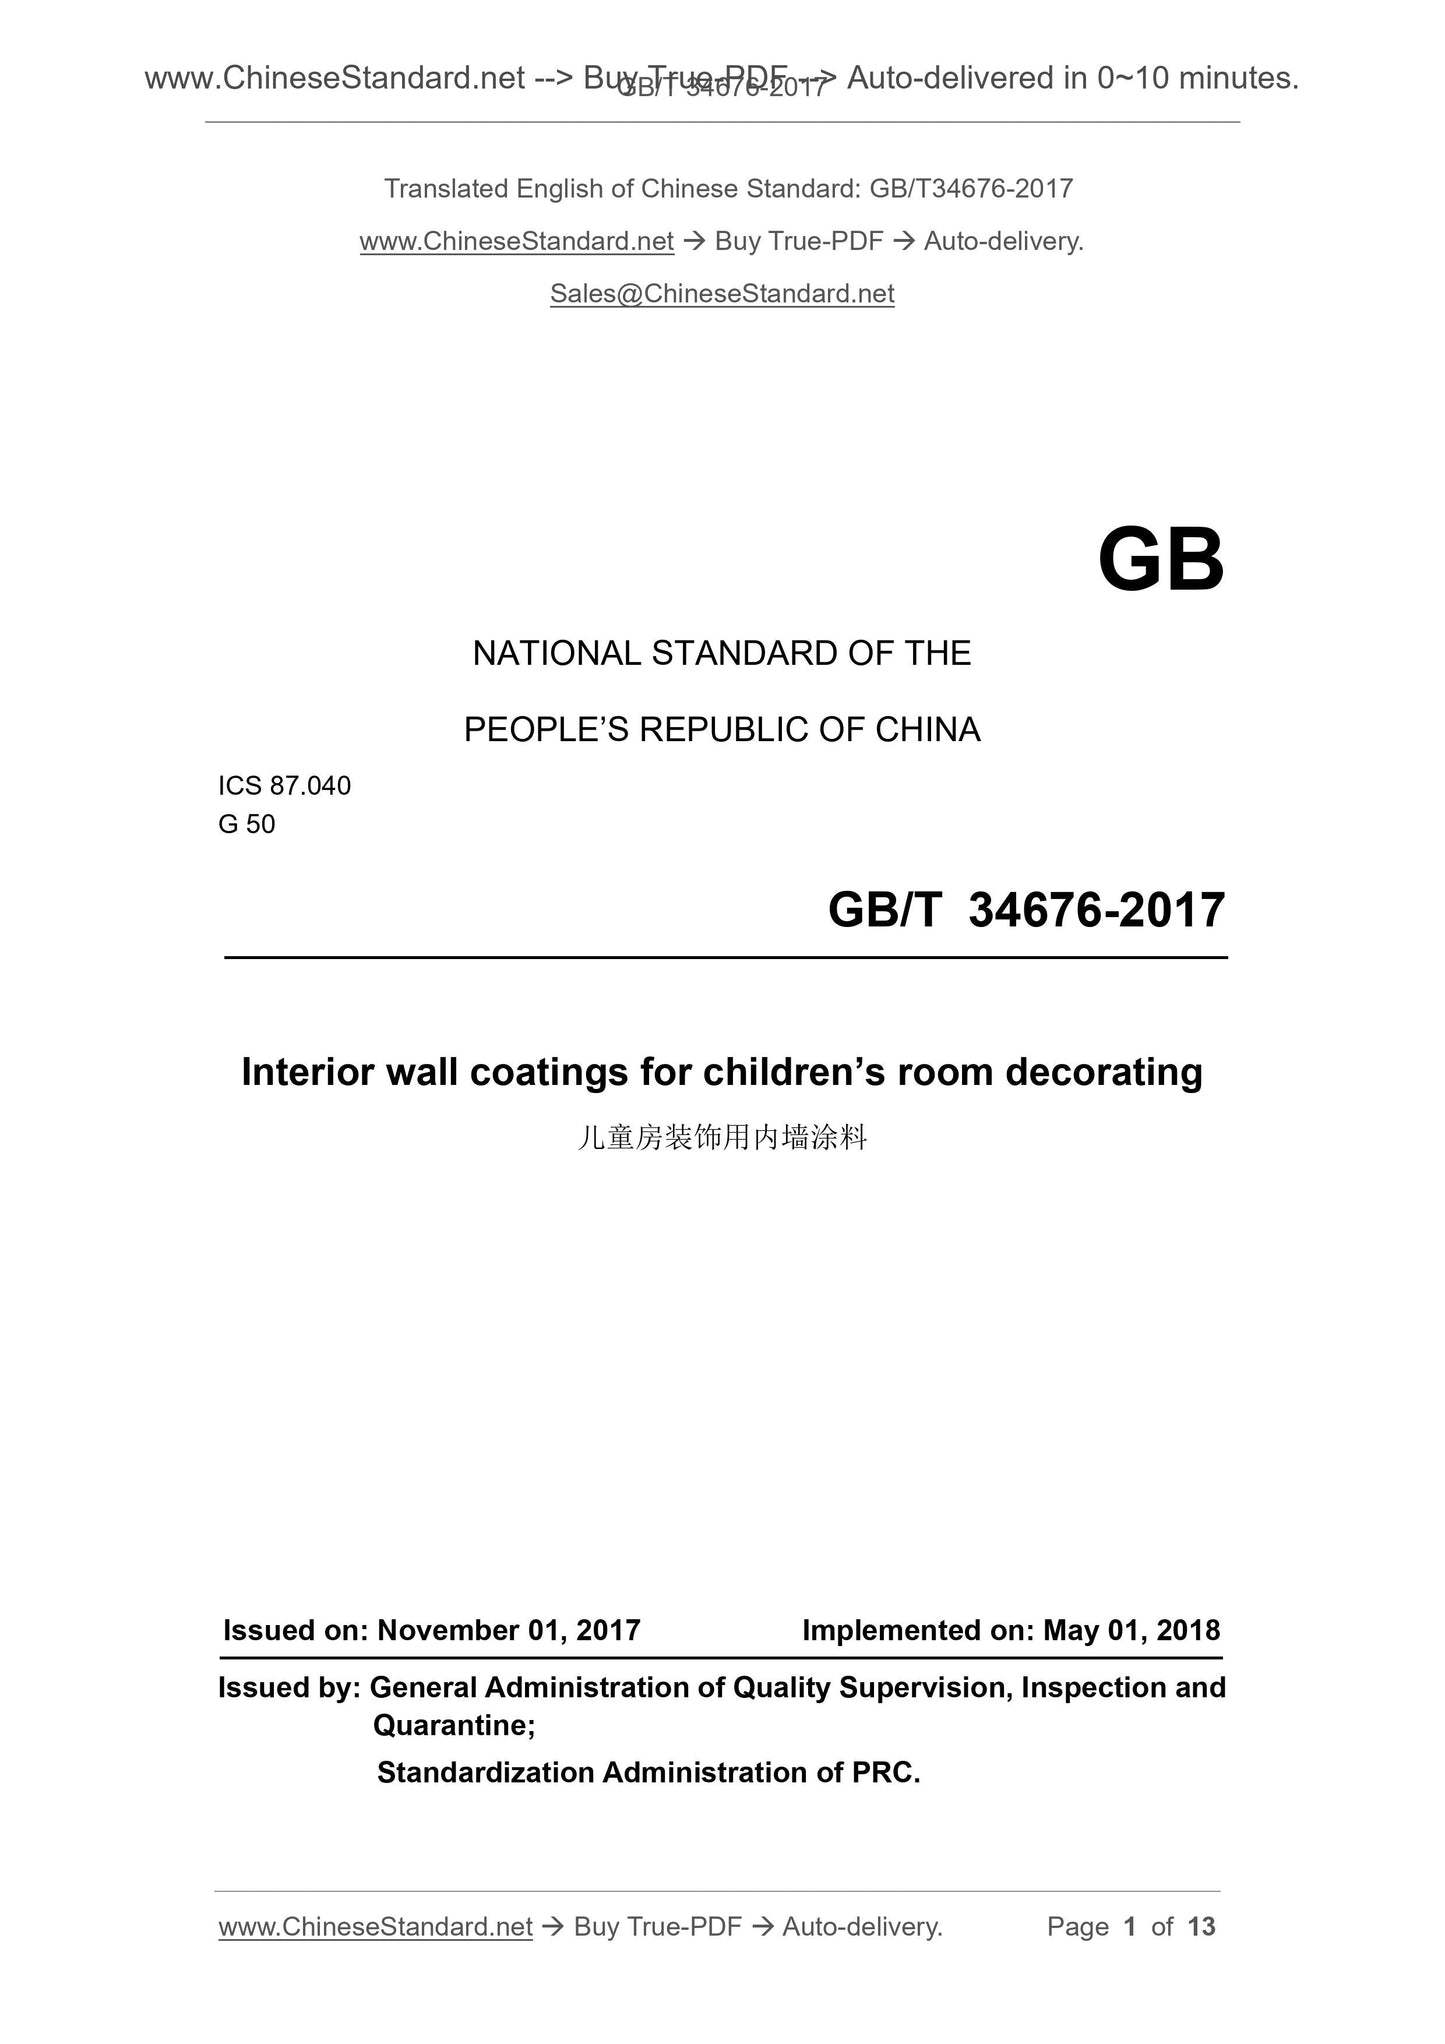 GB/T 34676-2017 Page 1